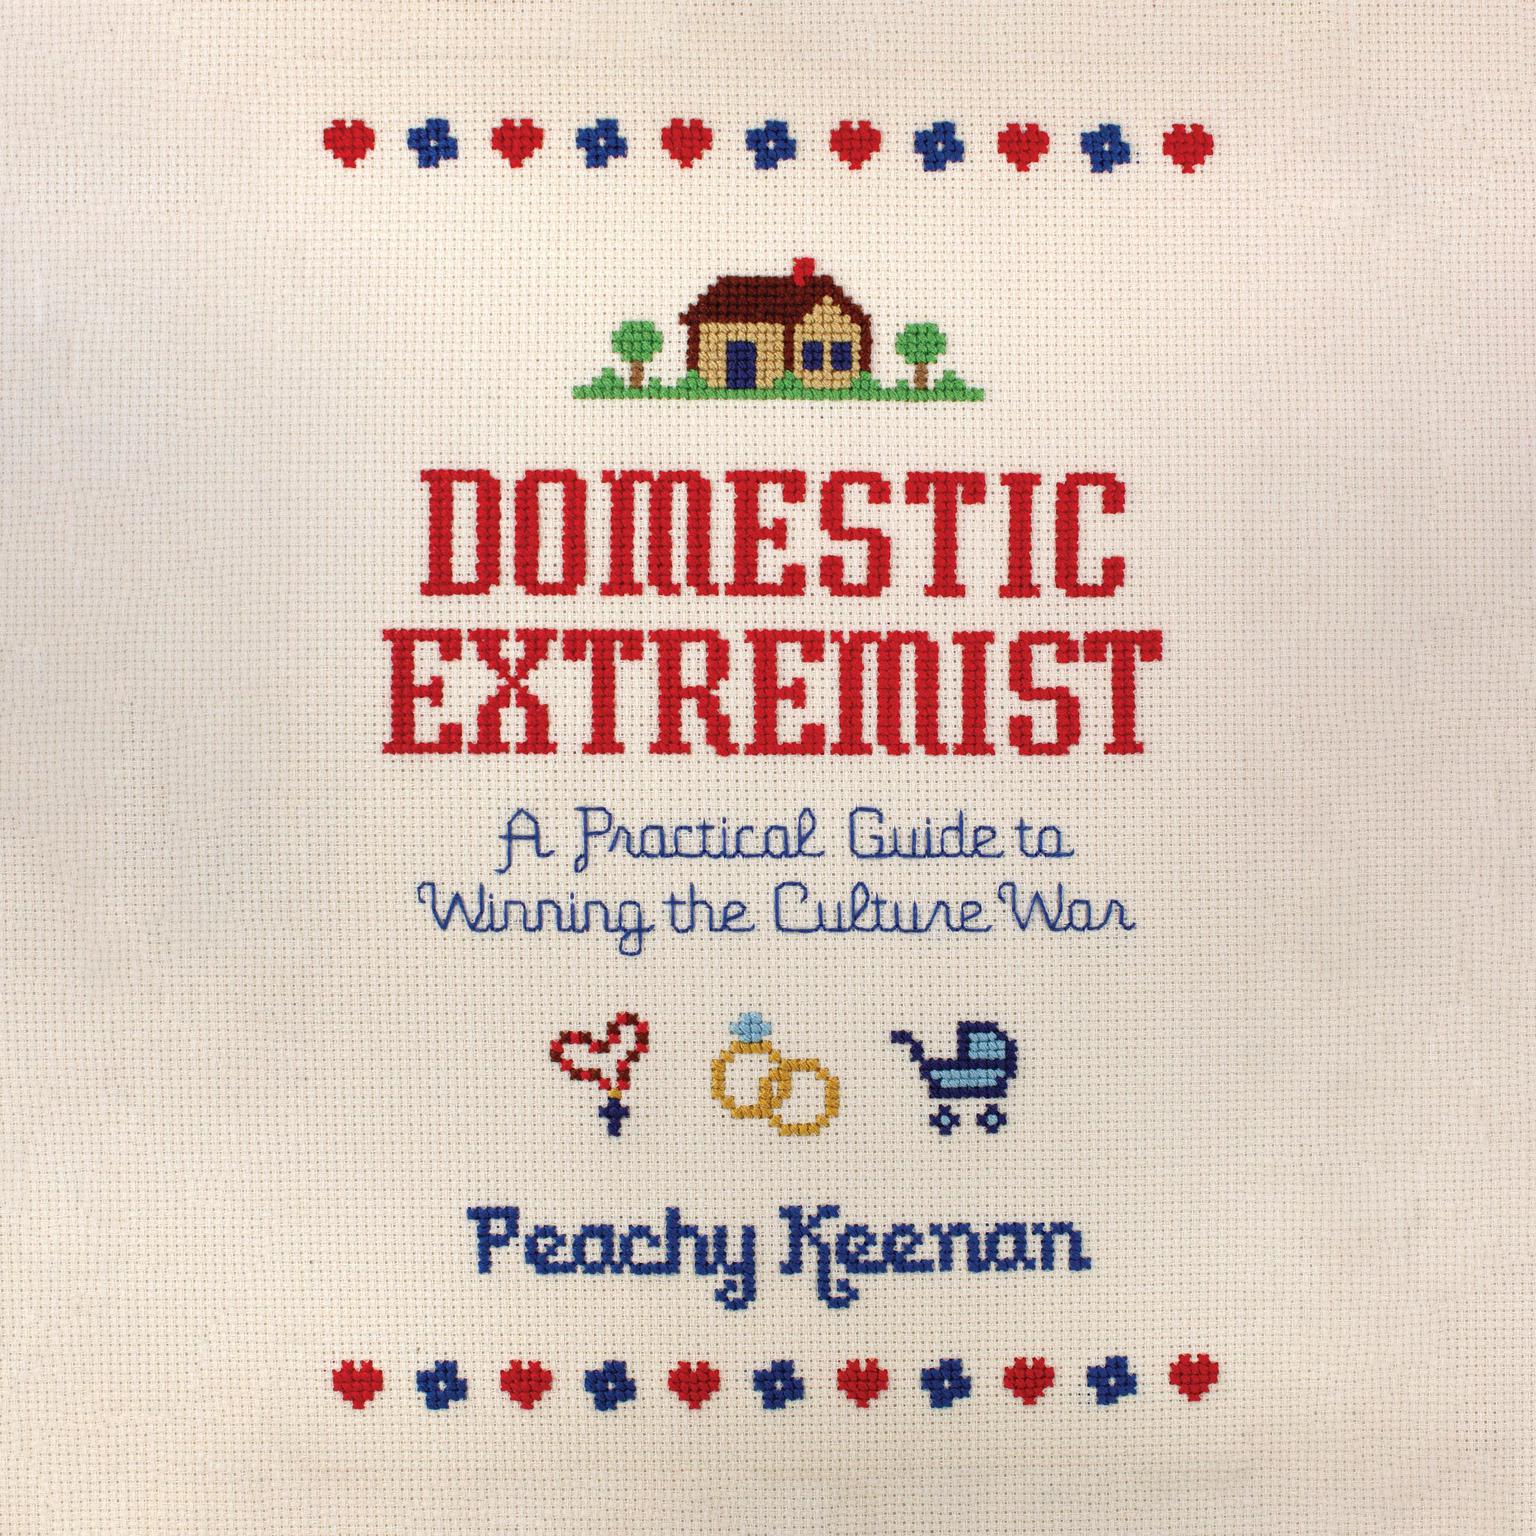 Domestic Extremist: A Practical Guide to Winning the Culture War Audiobook, by Peachy Keenan